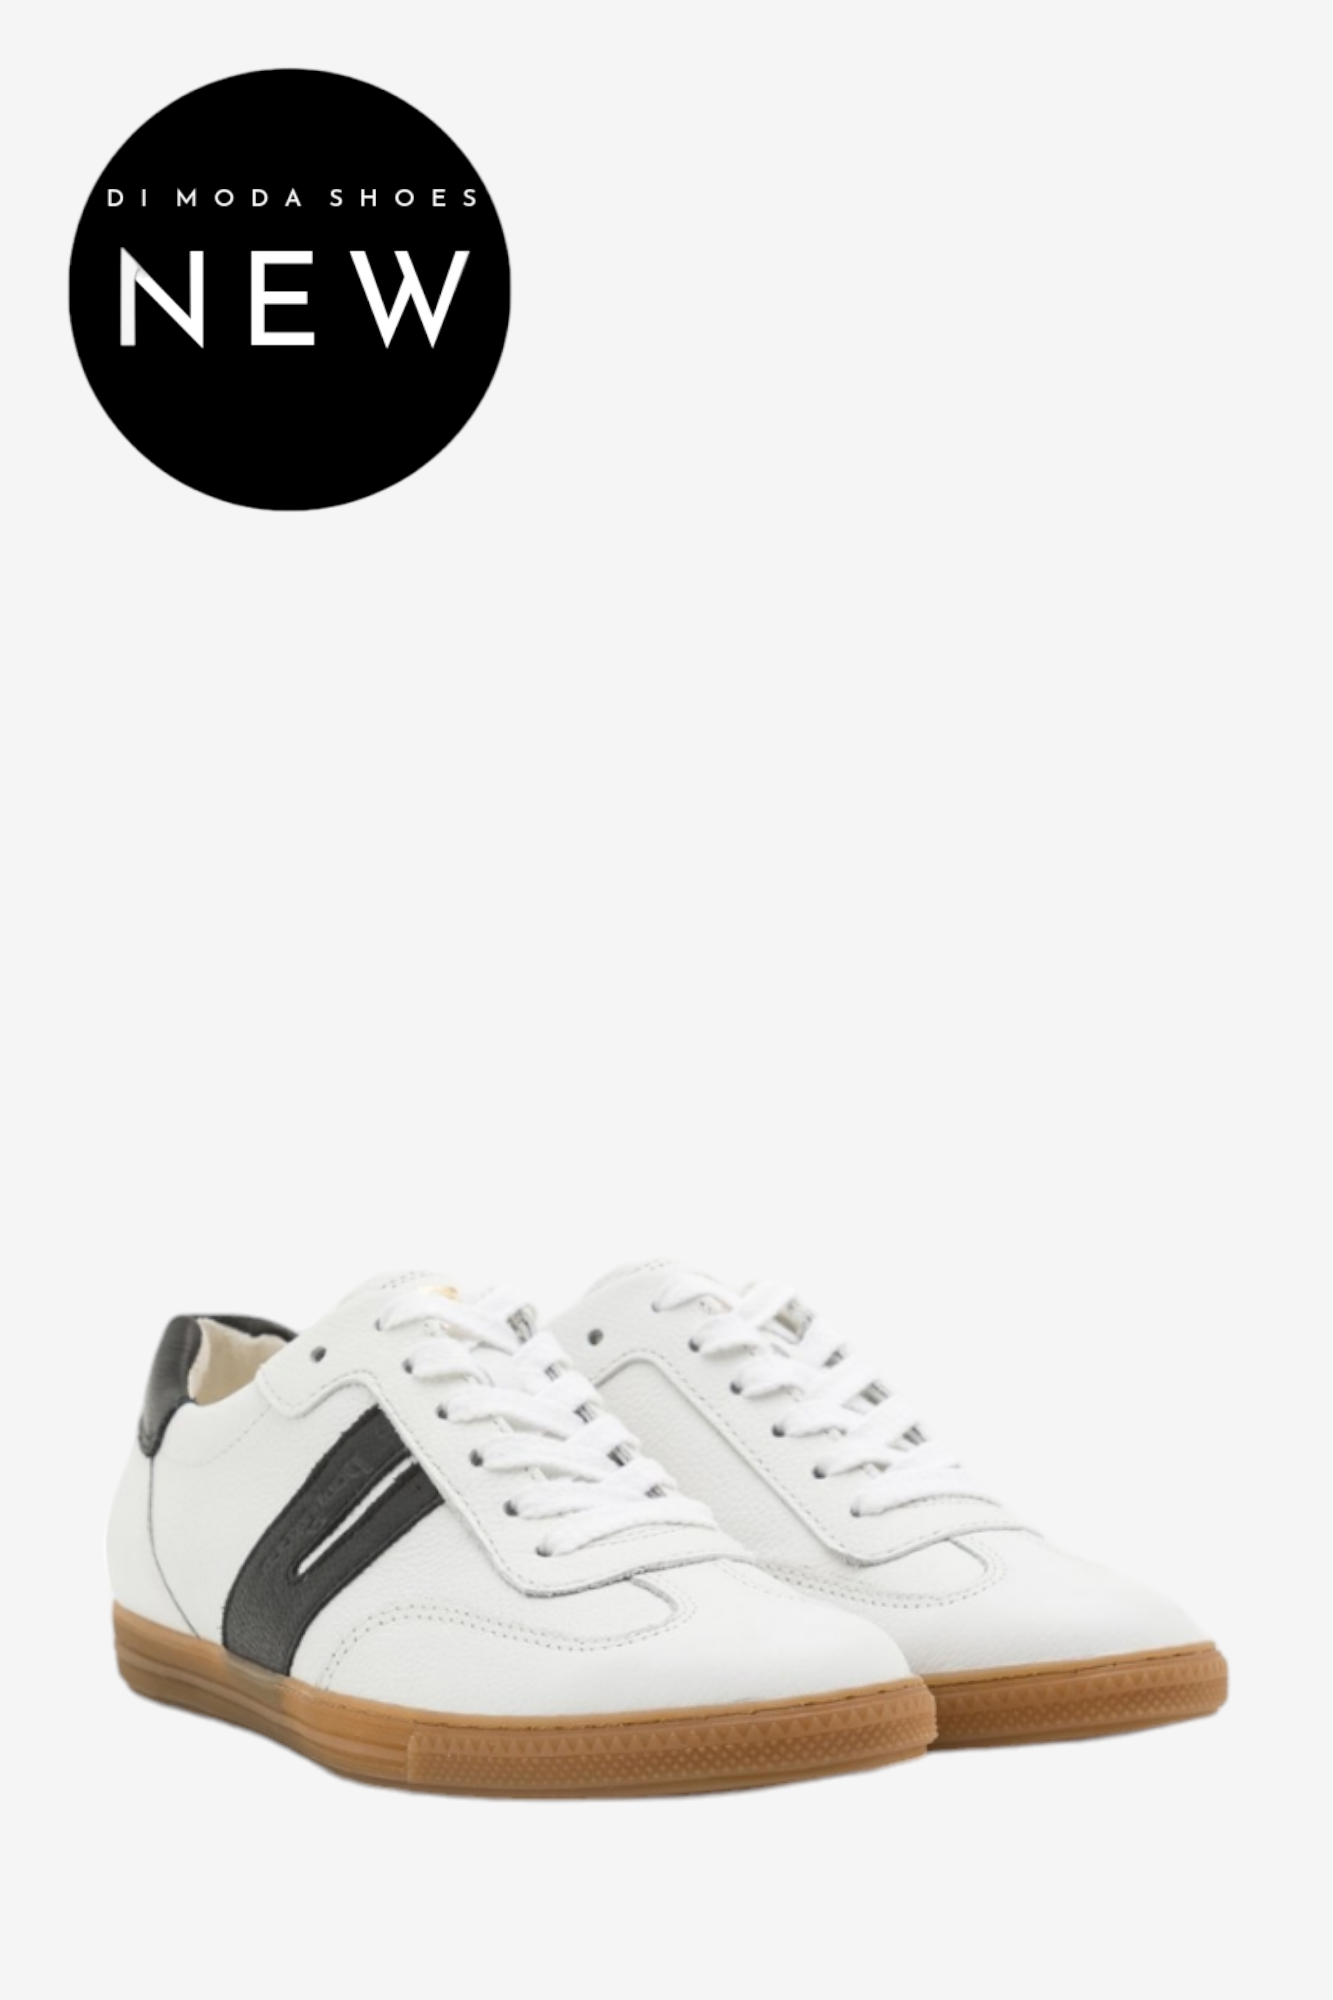 PAUL GREEN 5350 WHITE /BLACK LEATHER TRAINERS